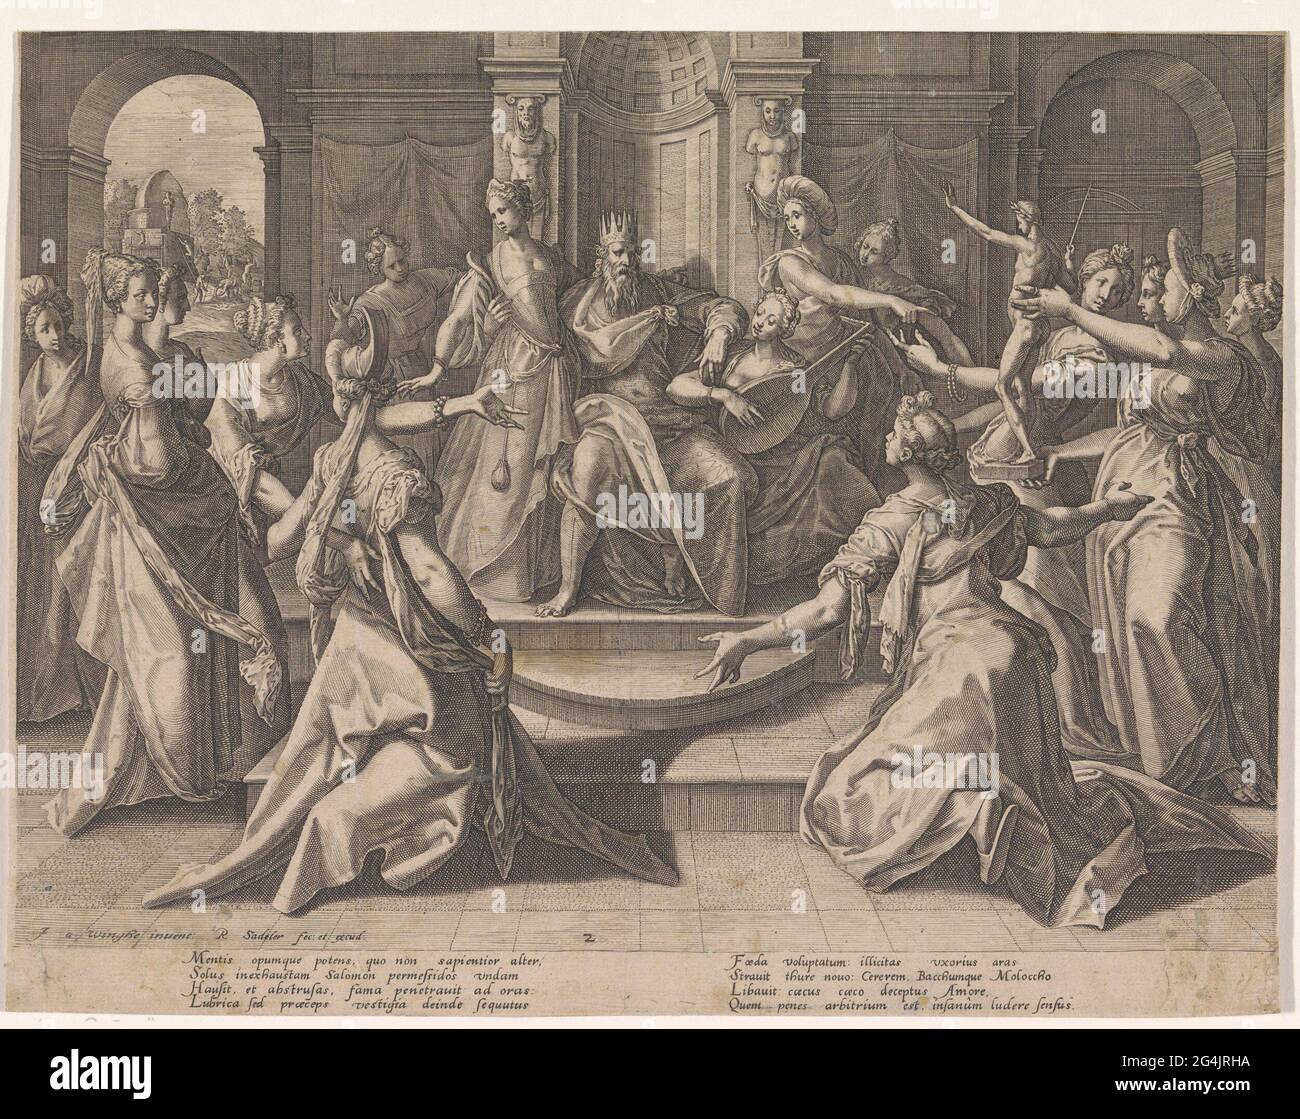 Solomo's idolatry; About the power of women. King Salomon is sitting on his  throne surrounded by a group of elegantly dressed women. One of them plays  the lute. Another woman holds him